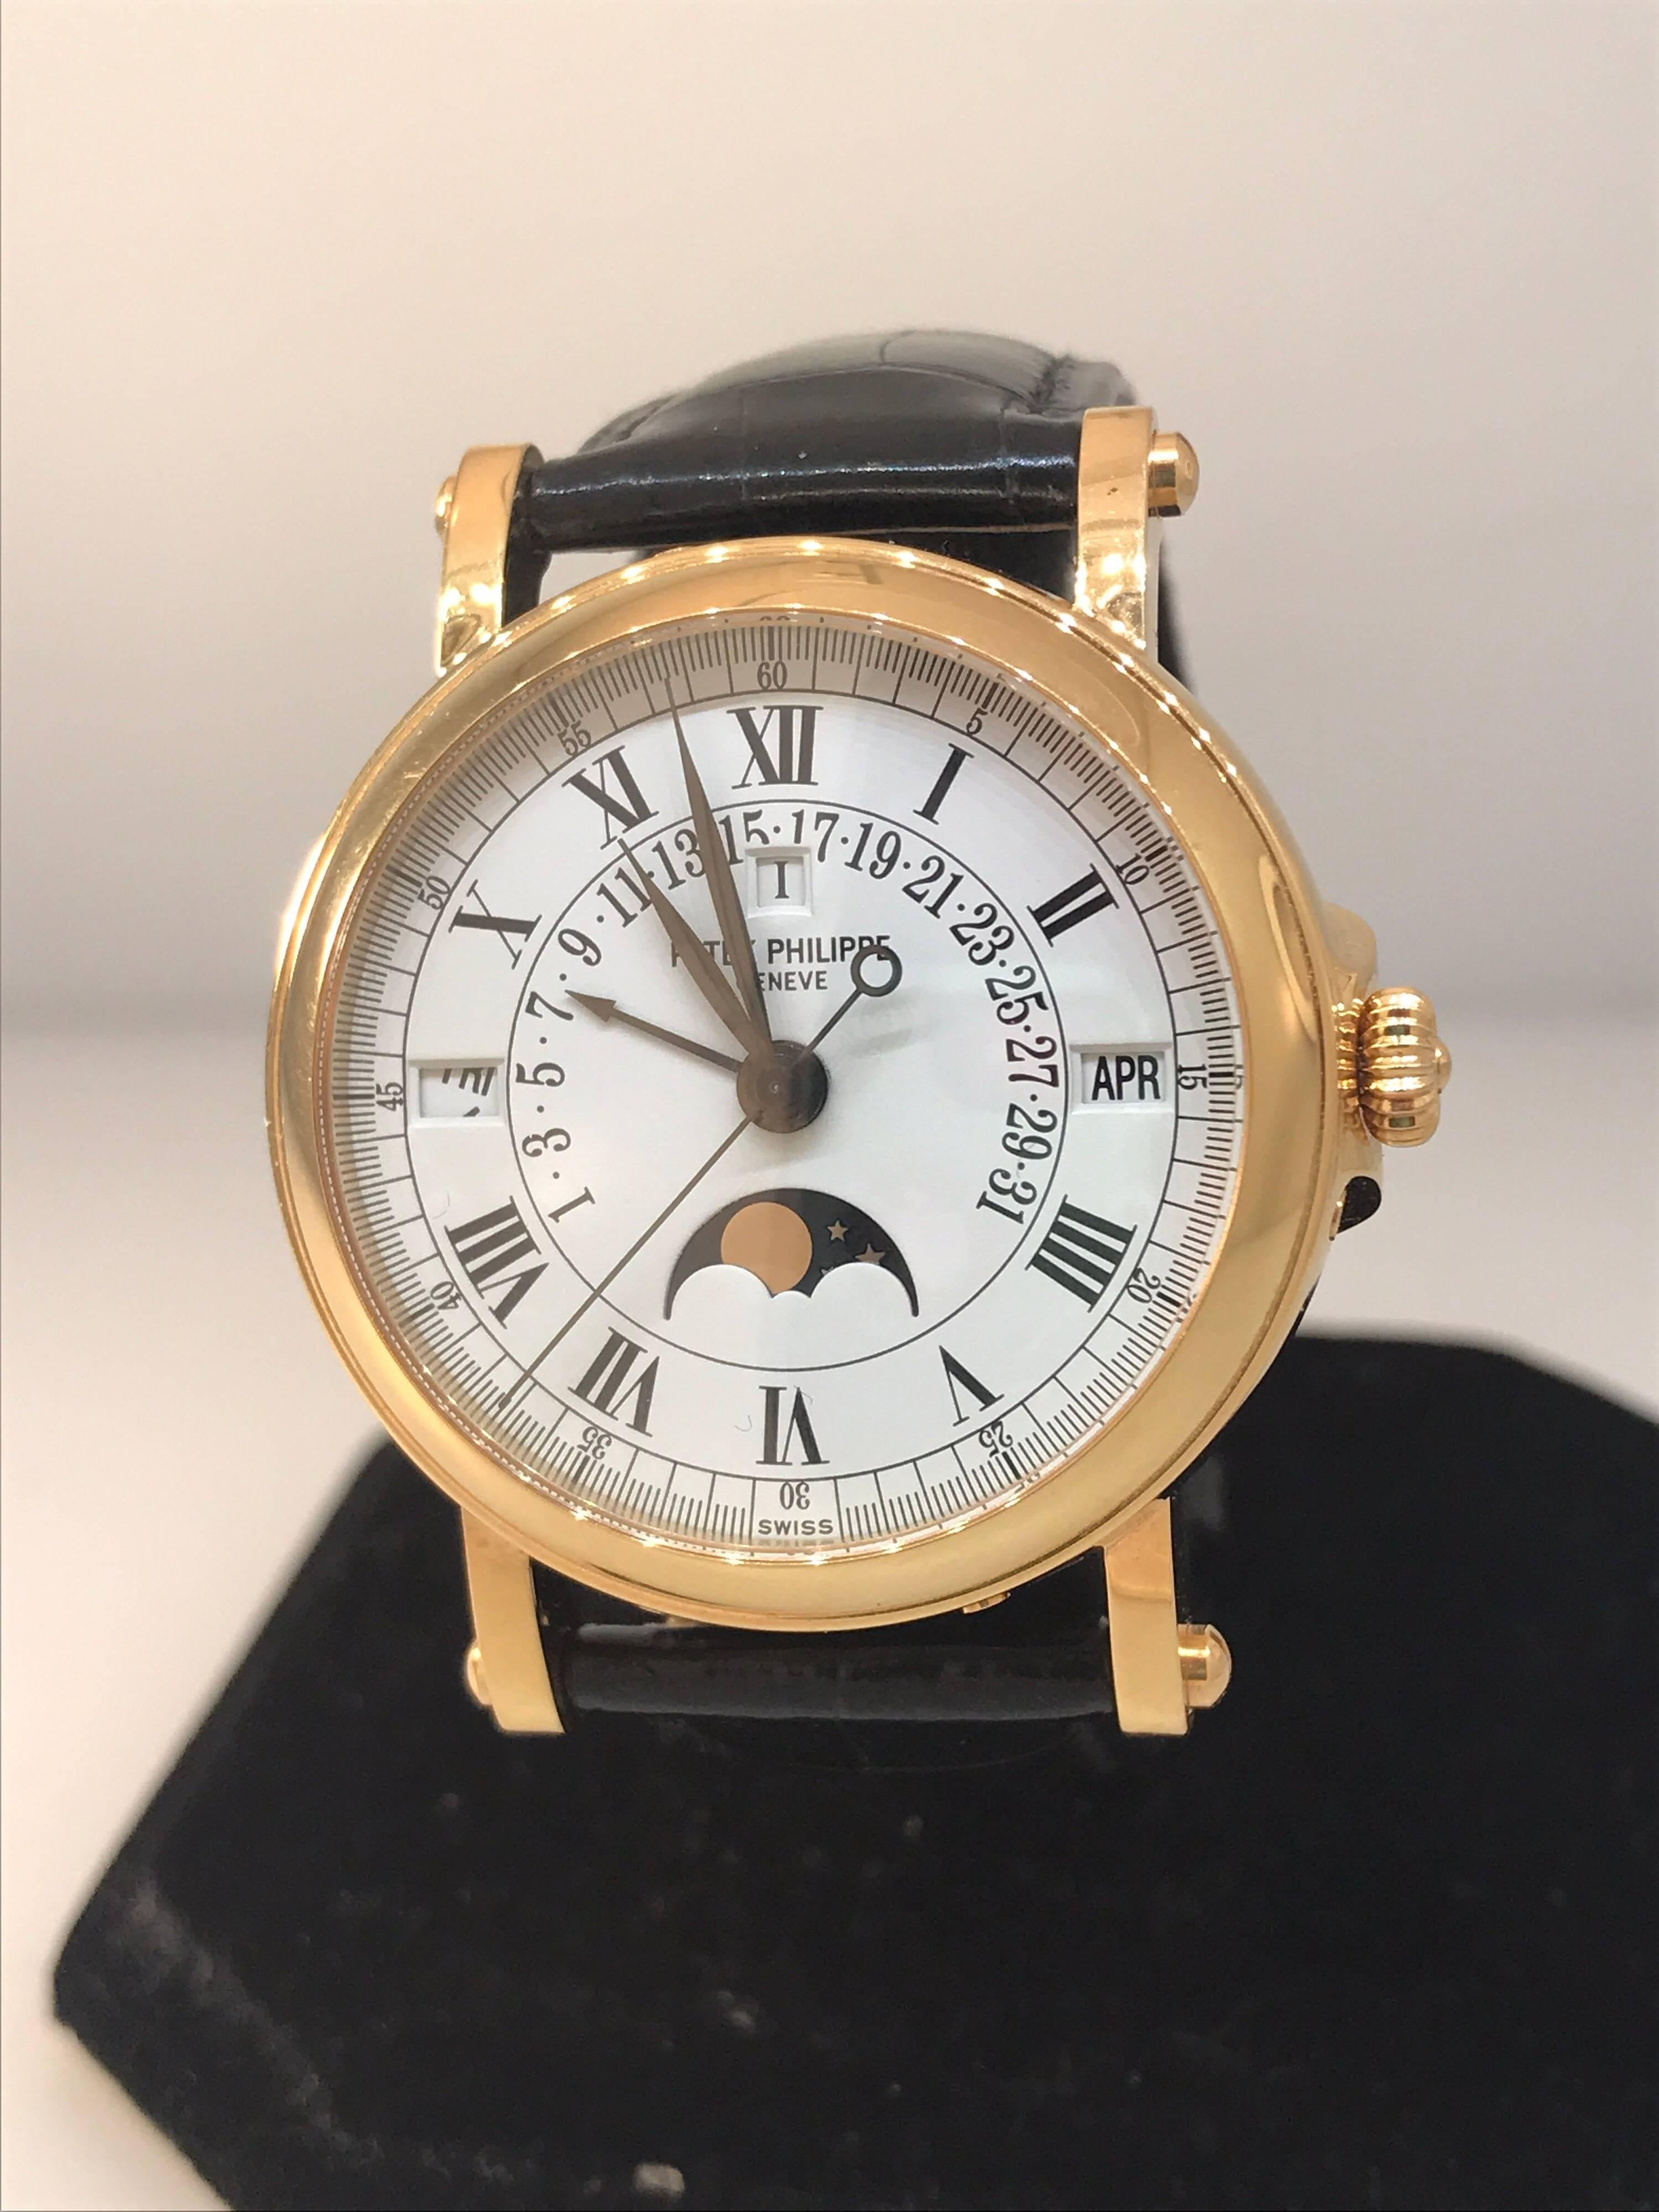 Patek Philippe Grand Complications Perpetual Calendar Men's Watch

Model Number: 5059R-001

100% Authentic

Pre-owned (Excellent Condition)

Comes with original Patek Philippe Warranty, Leather pouch and instruction manual (not the box)

18 Karat